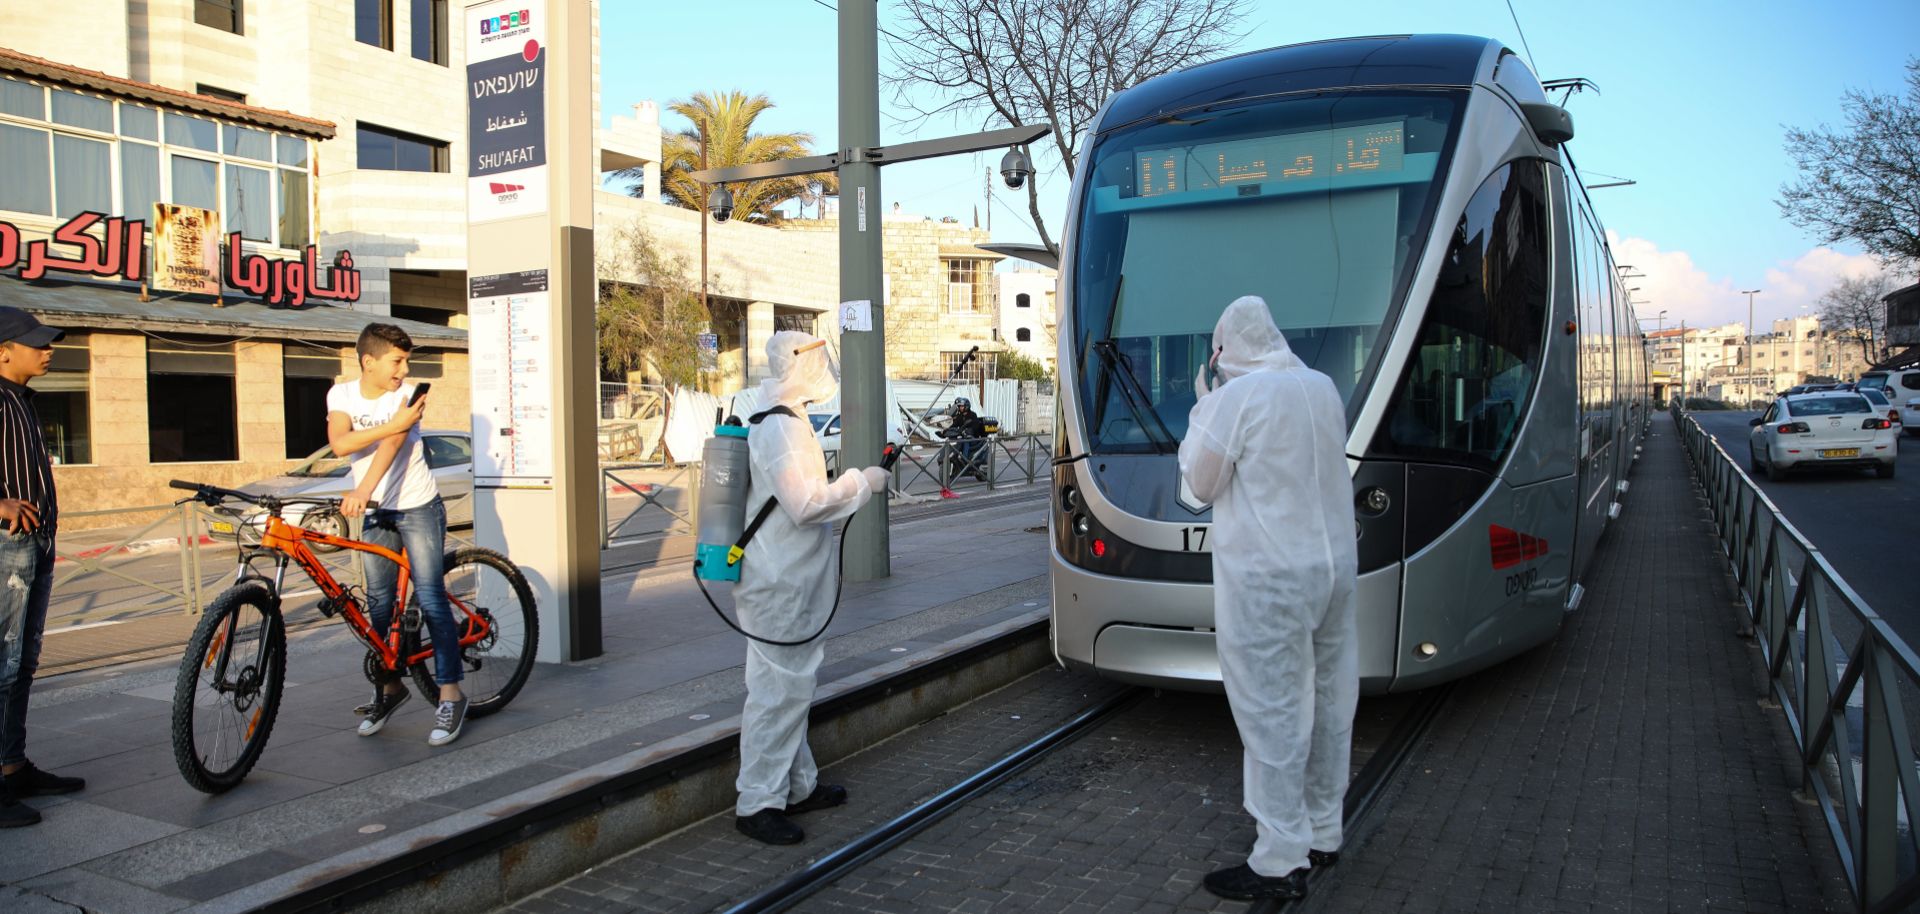 Officials in hazmat suits disinfect the outside a tram as a precaution against the coronavirus outbreak in Jerusalem, Israel on March 16, 2020. 